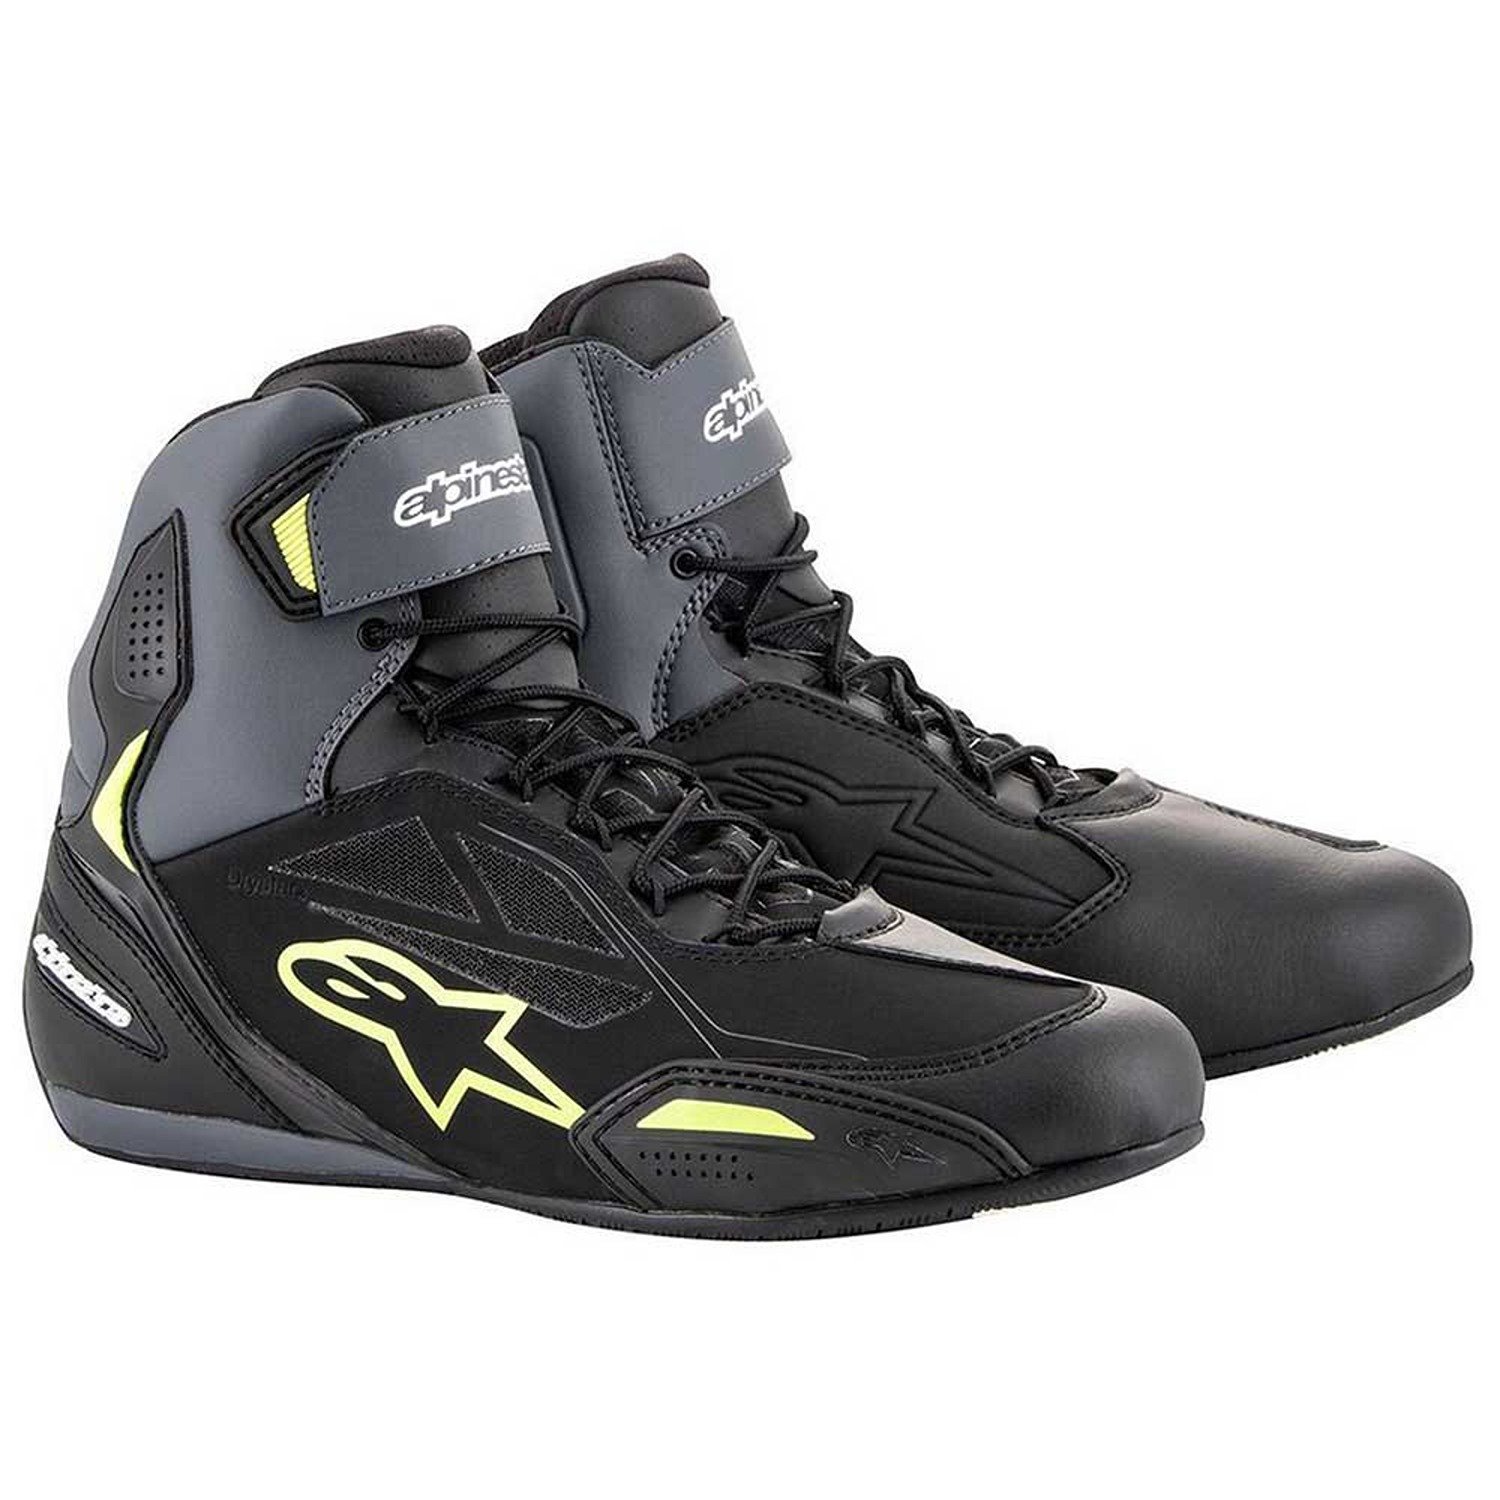 Image of Alpinestars Faster-3 Shoes Black Yellow Fluo Size US 125 EN